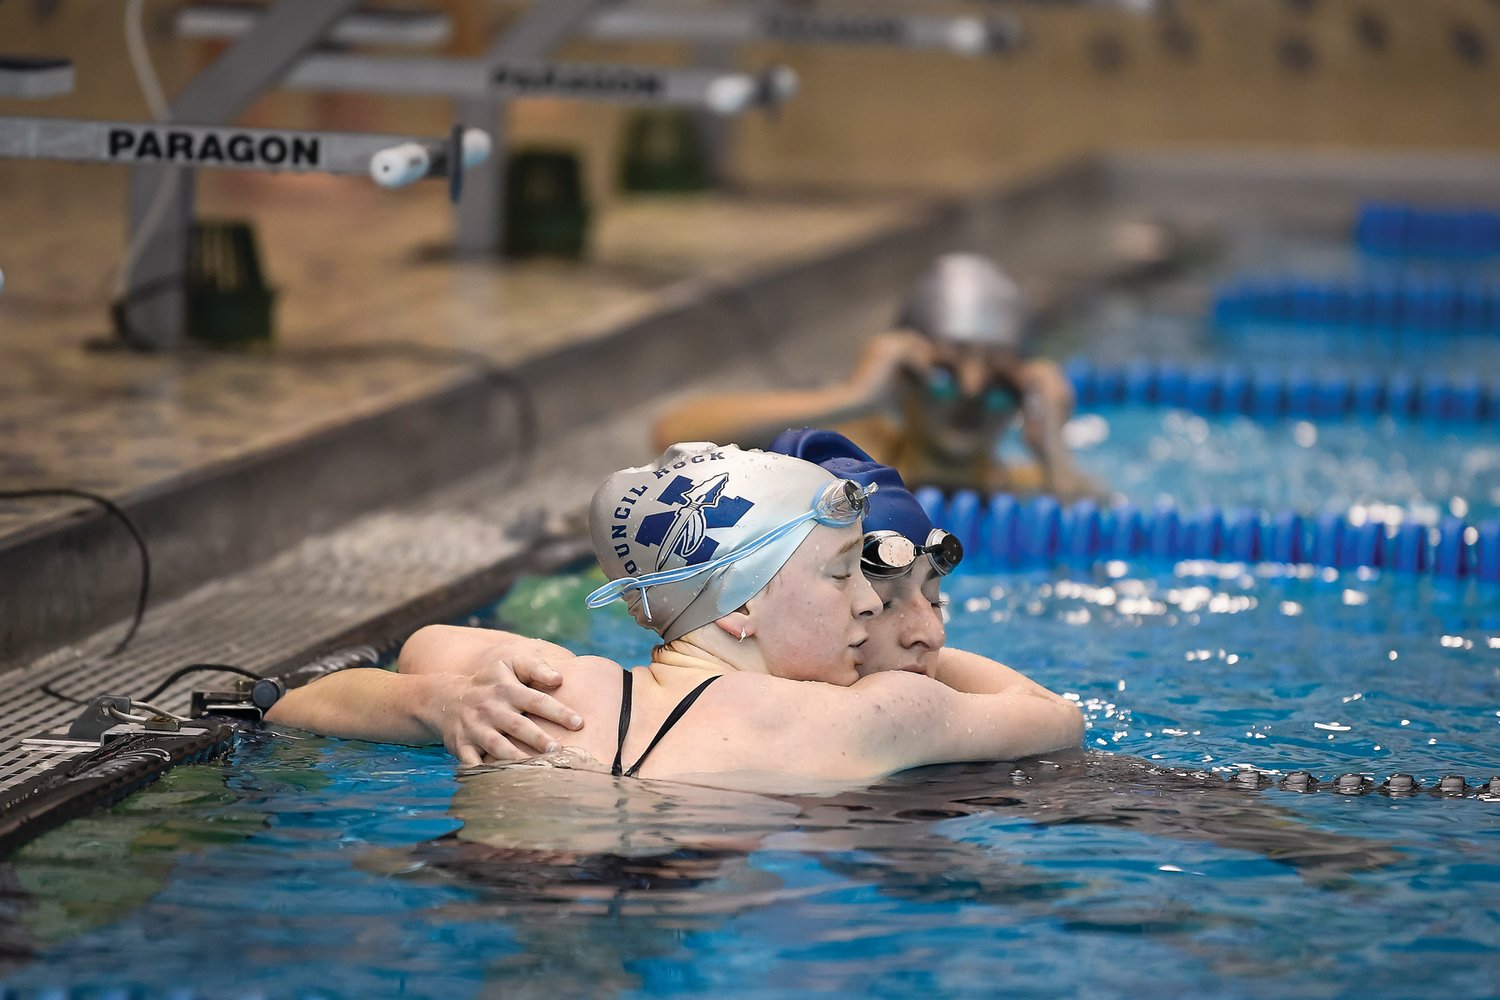 Michael A. Apice
Council Rock North’s Kaitlyn Landers hugs second-place Council Rock South’s Elana Rhoge after winning the 200 individual medley.